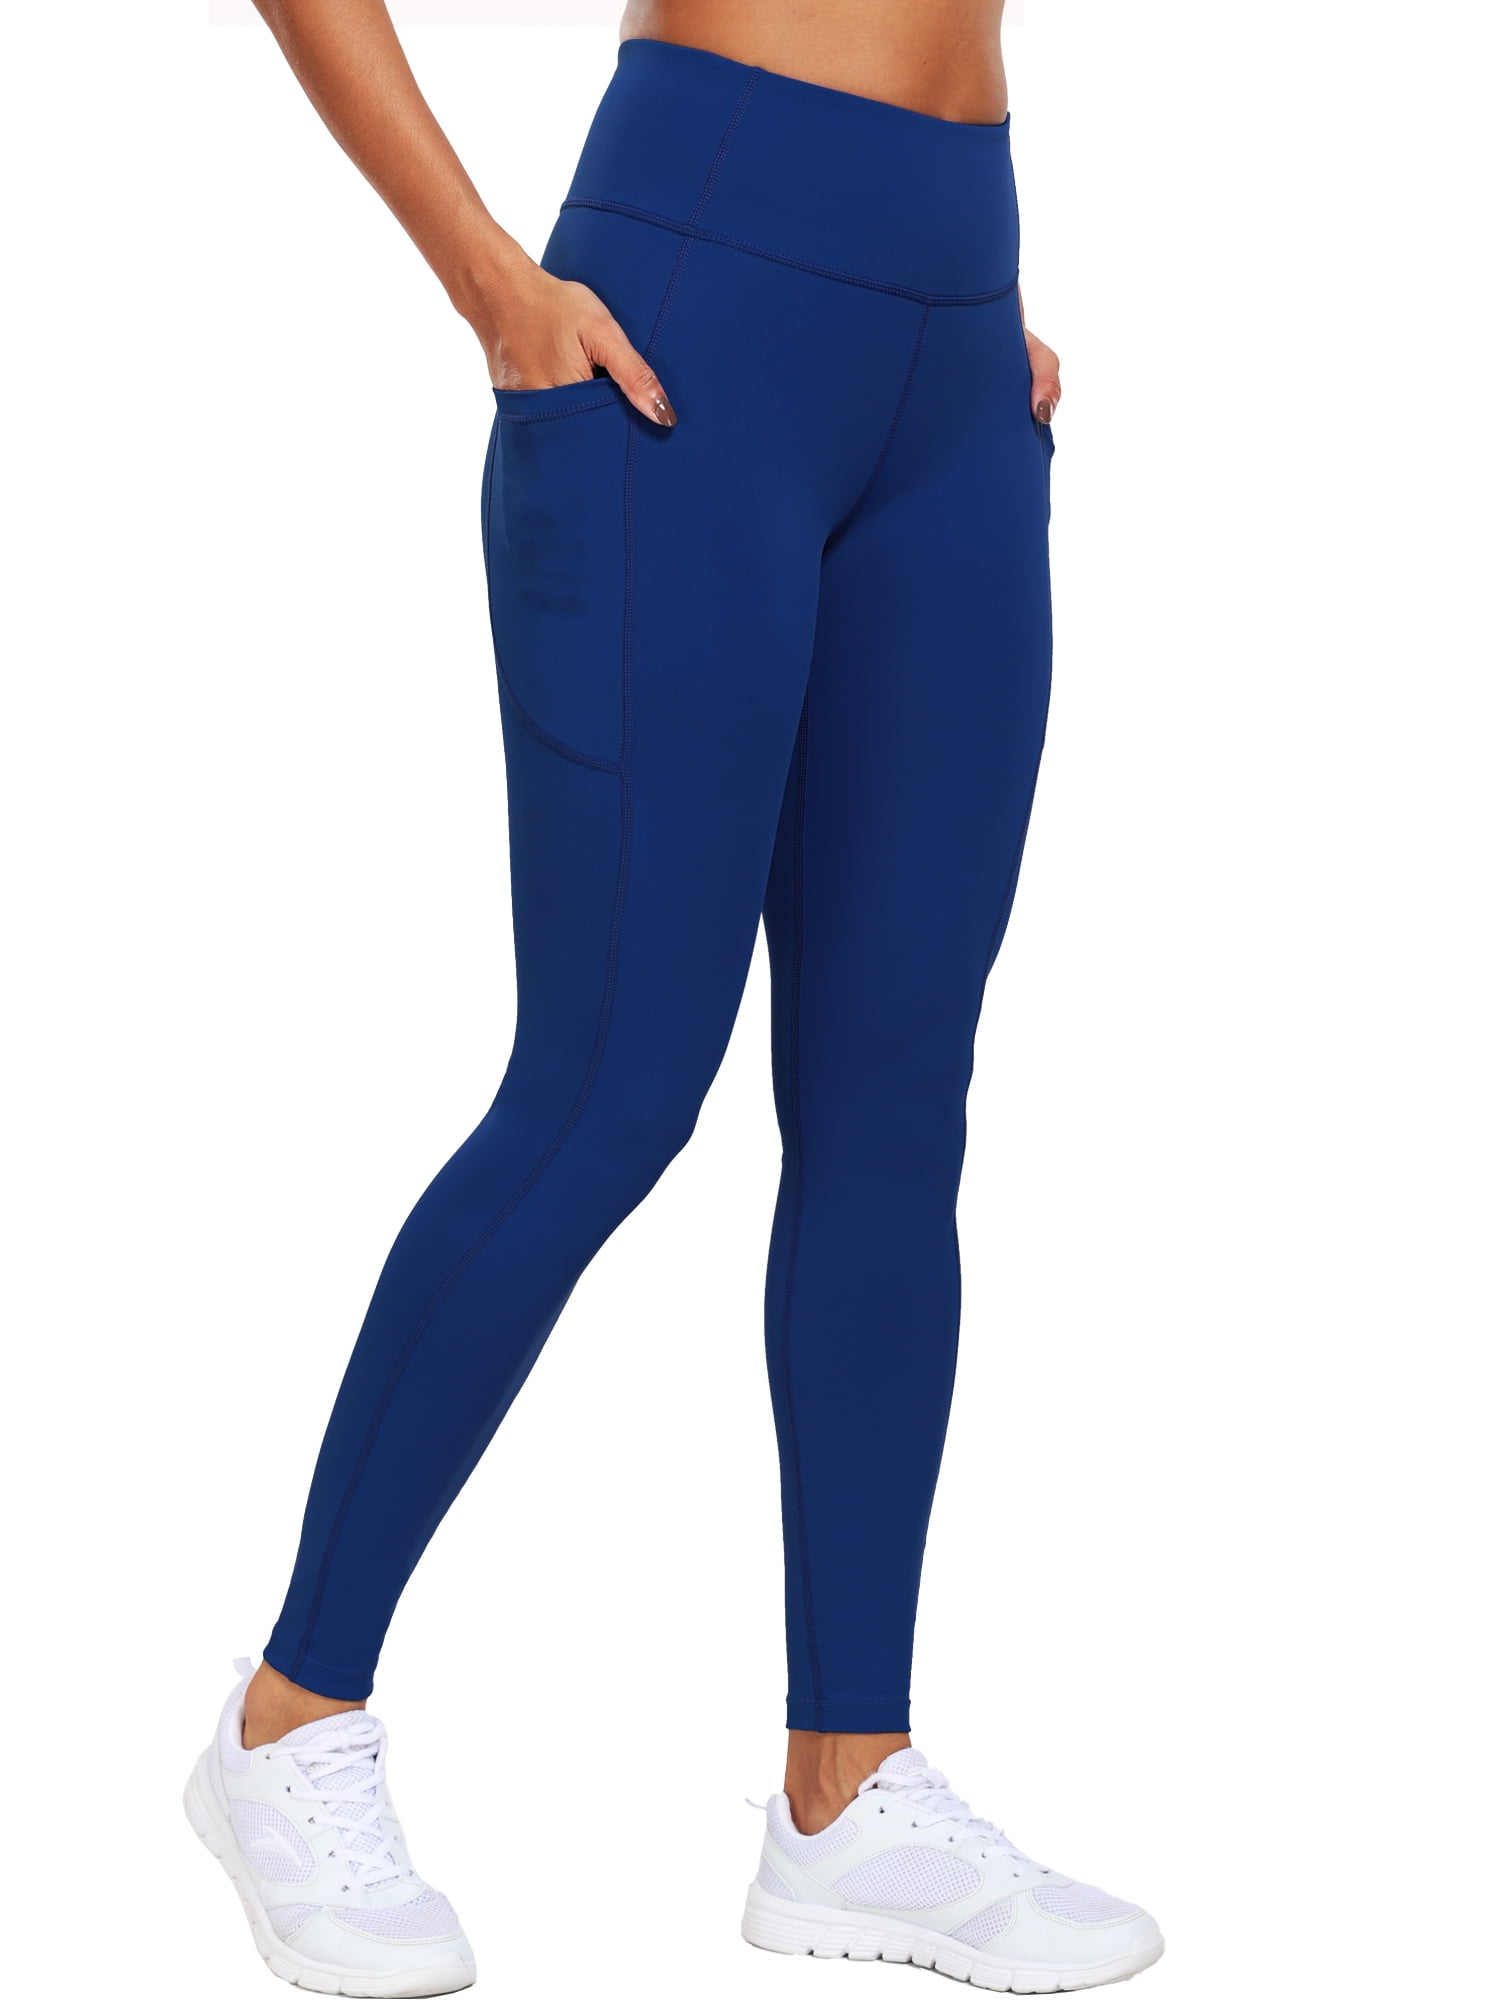 NELEUS Womens High Waist Ankle Yoga Leggings Workout with Two  Pockets,Blue,US Size 2XL 